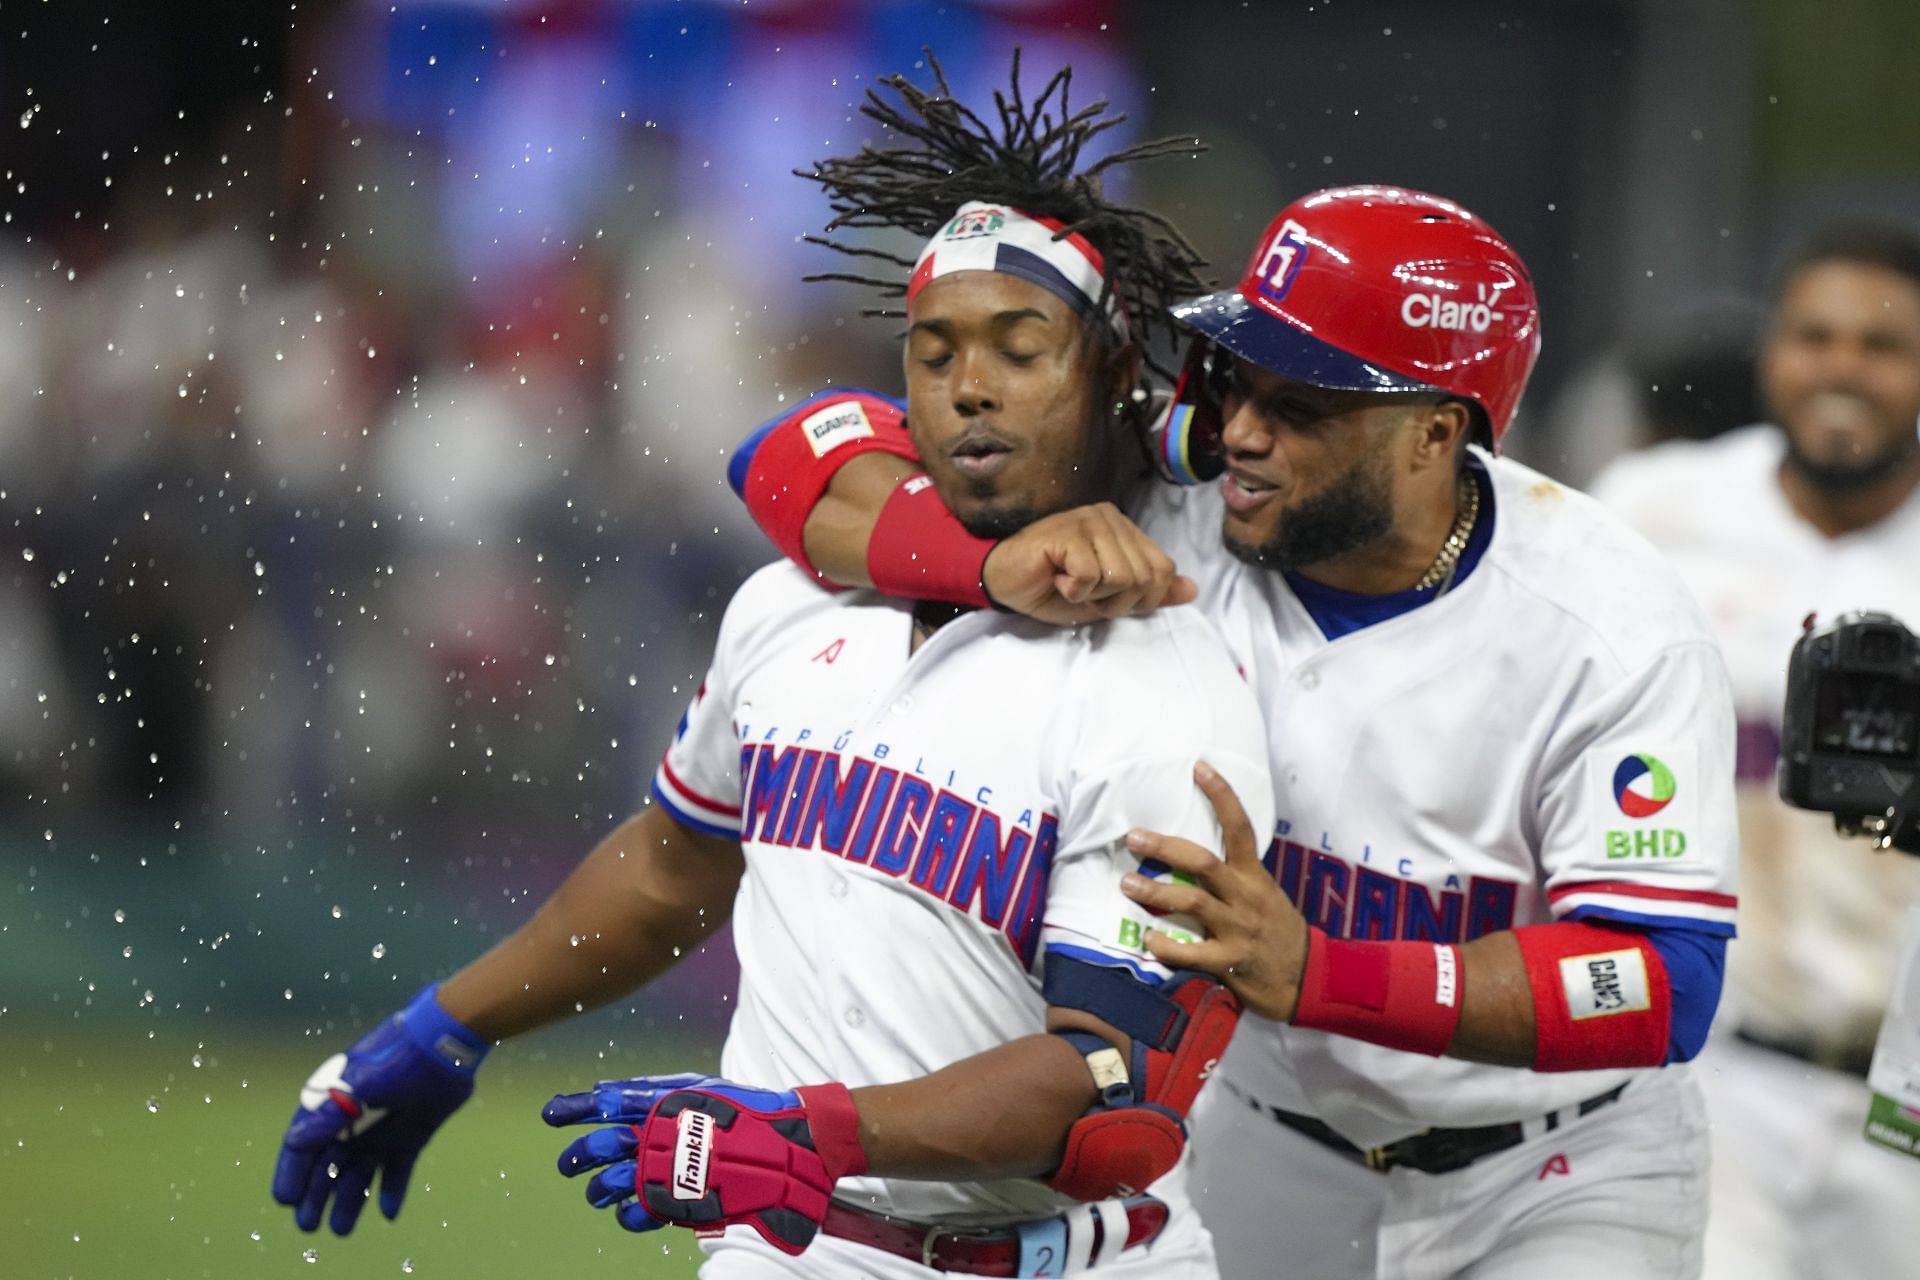 Robinson Cano #24 hugs Jean Segura #2 of The Dominican Republic after his walk off hit to end the game against Israel